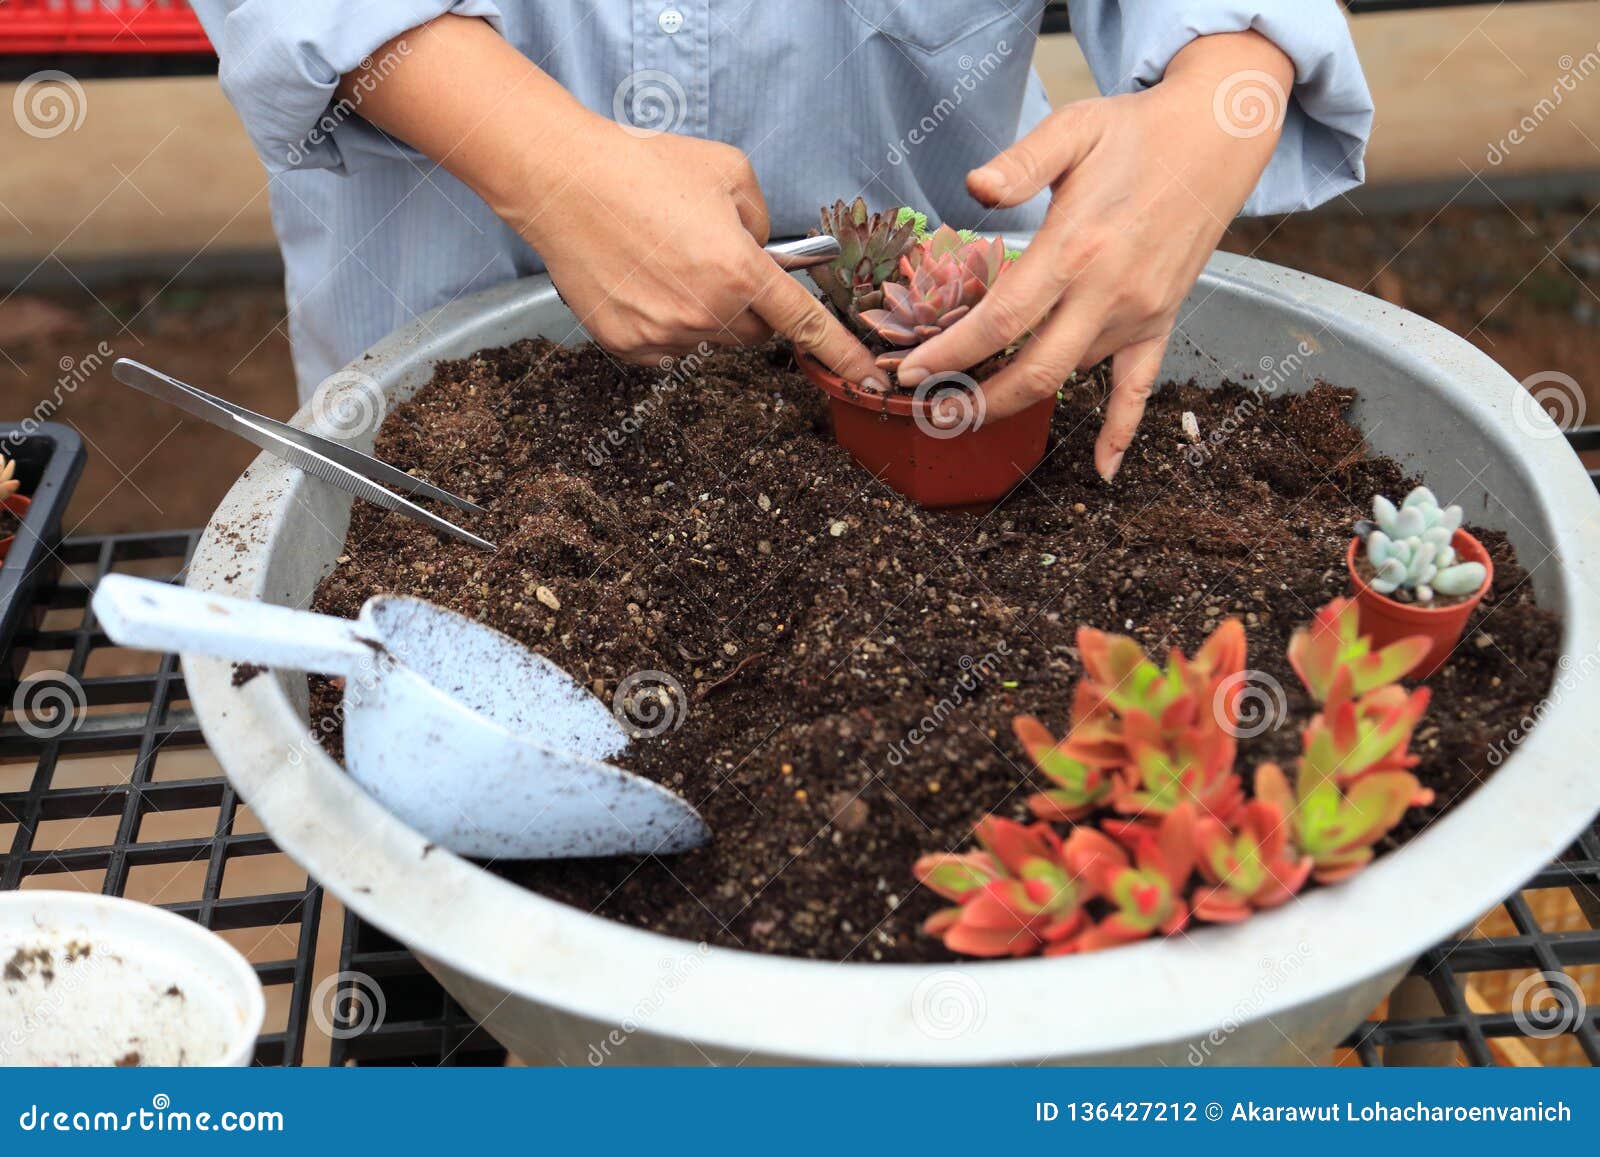 gardener is arranging young succulent plant for potting into a new decorative container